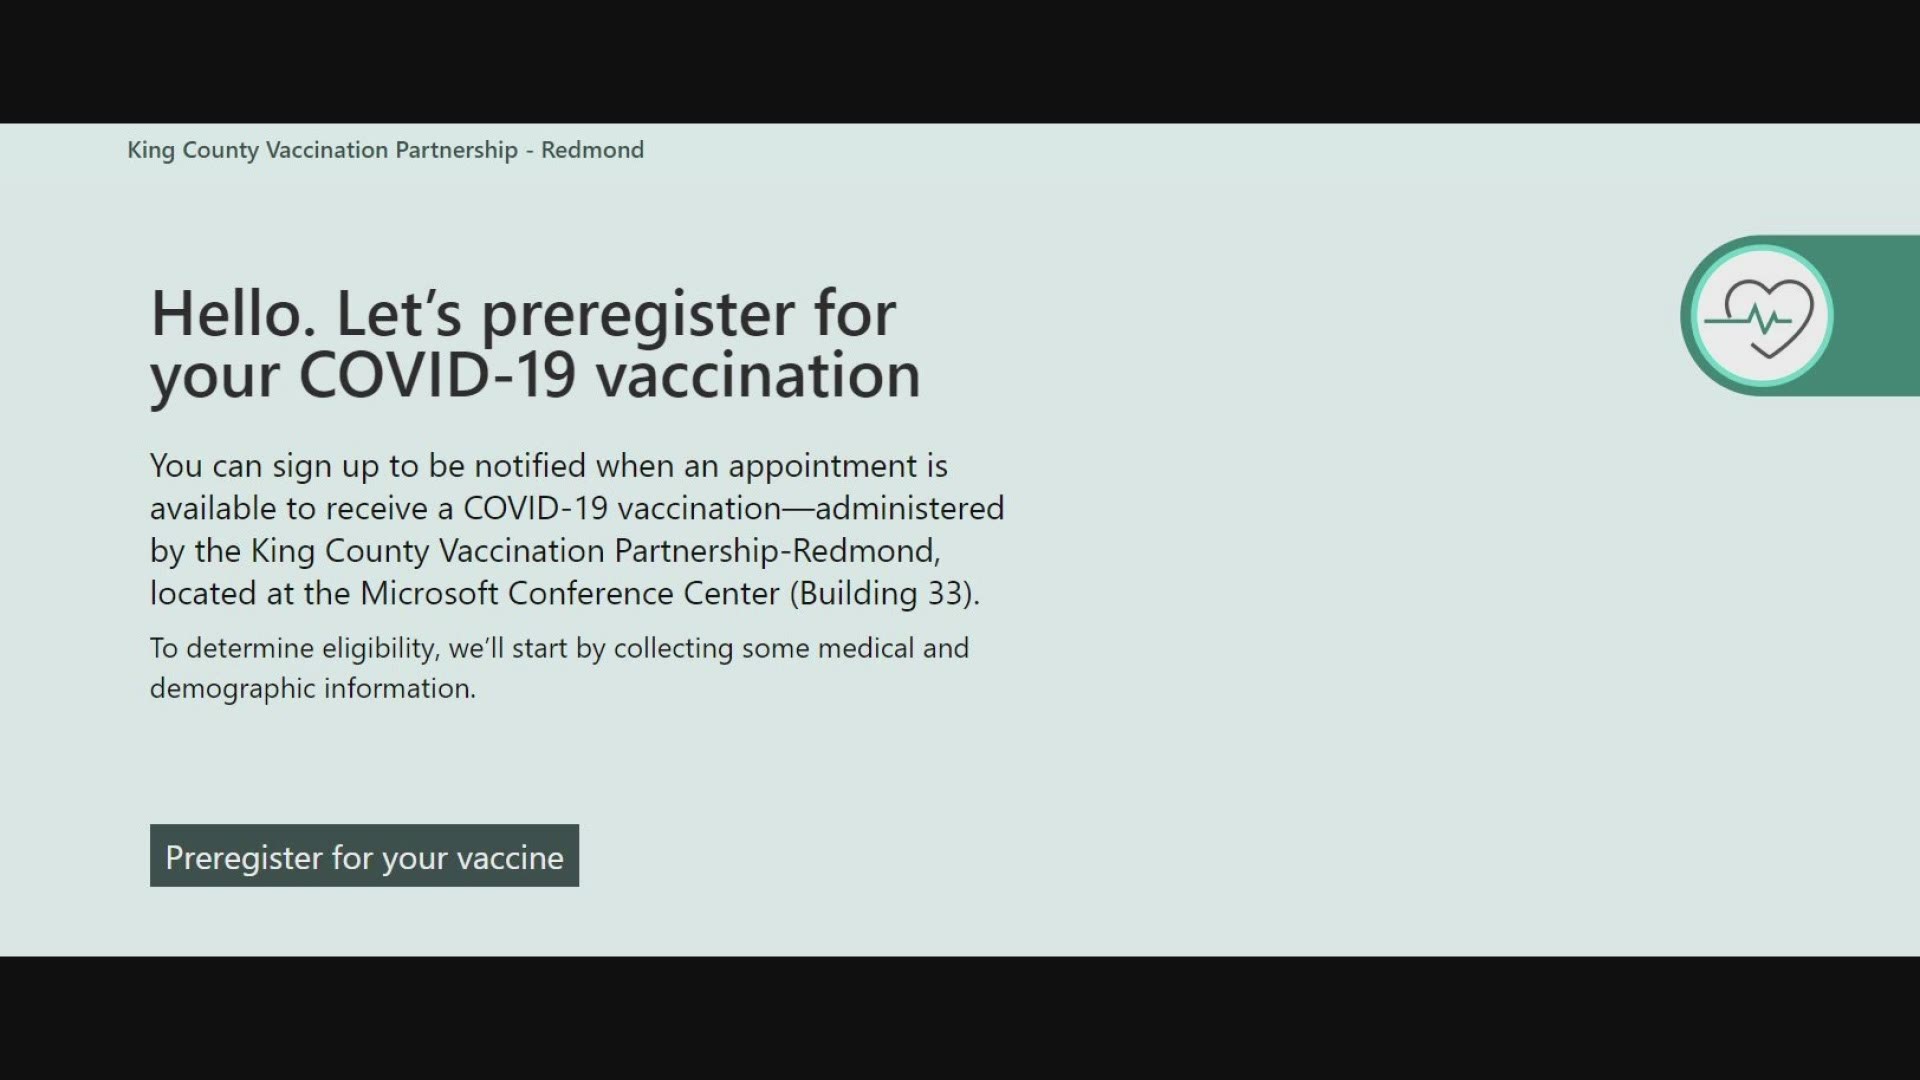 Everyone 16 and older will be able to get a COVID-19 vaccine starting April 15, but the tricky part comes with finding an appointment, which are in high demand.